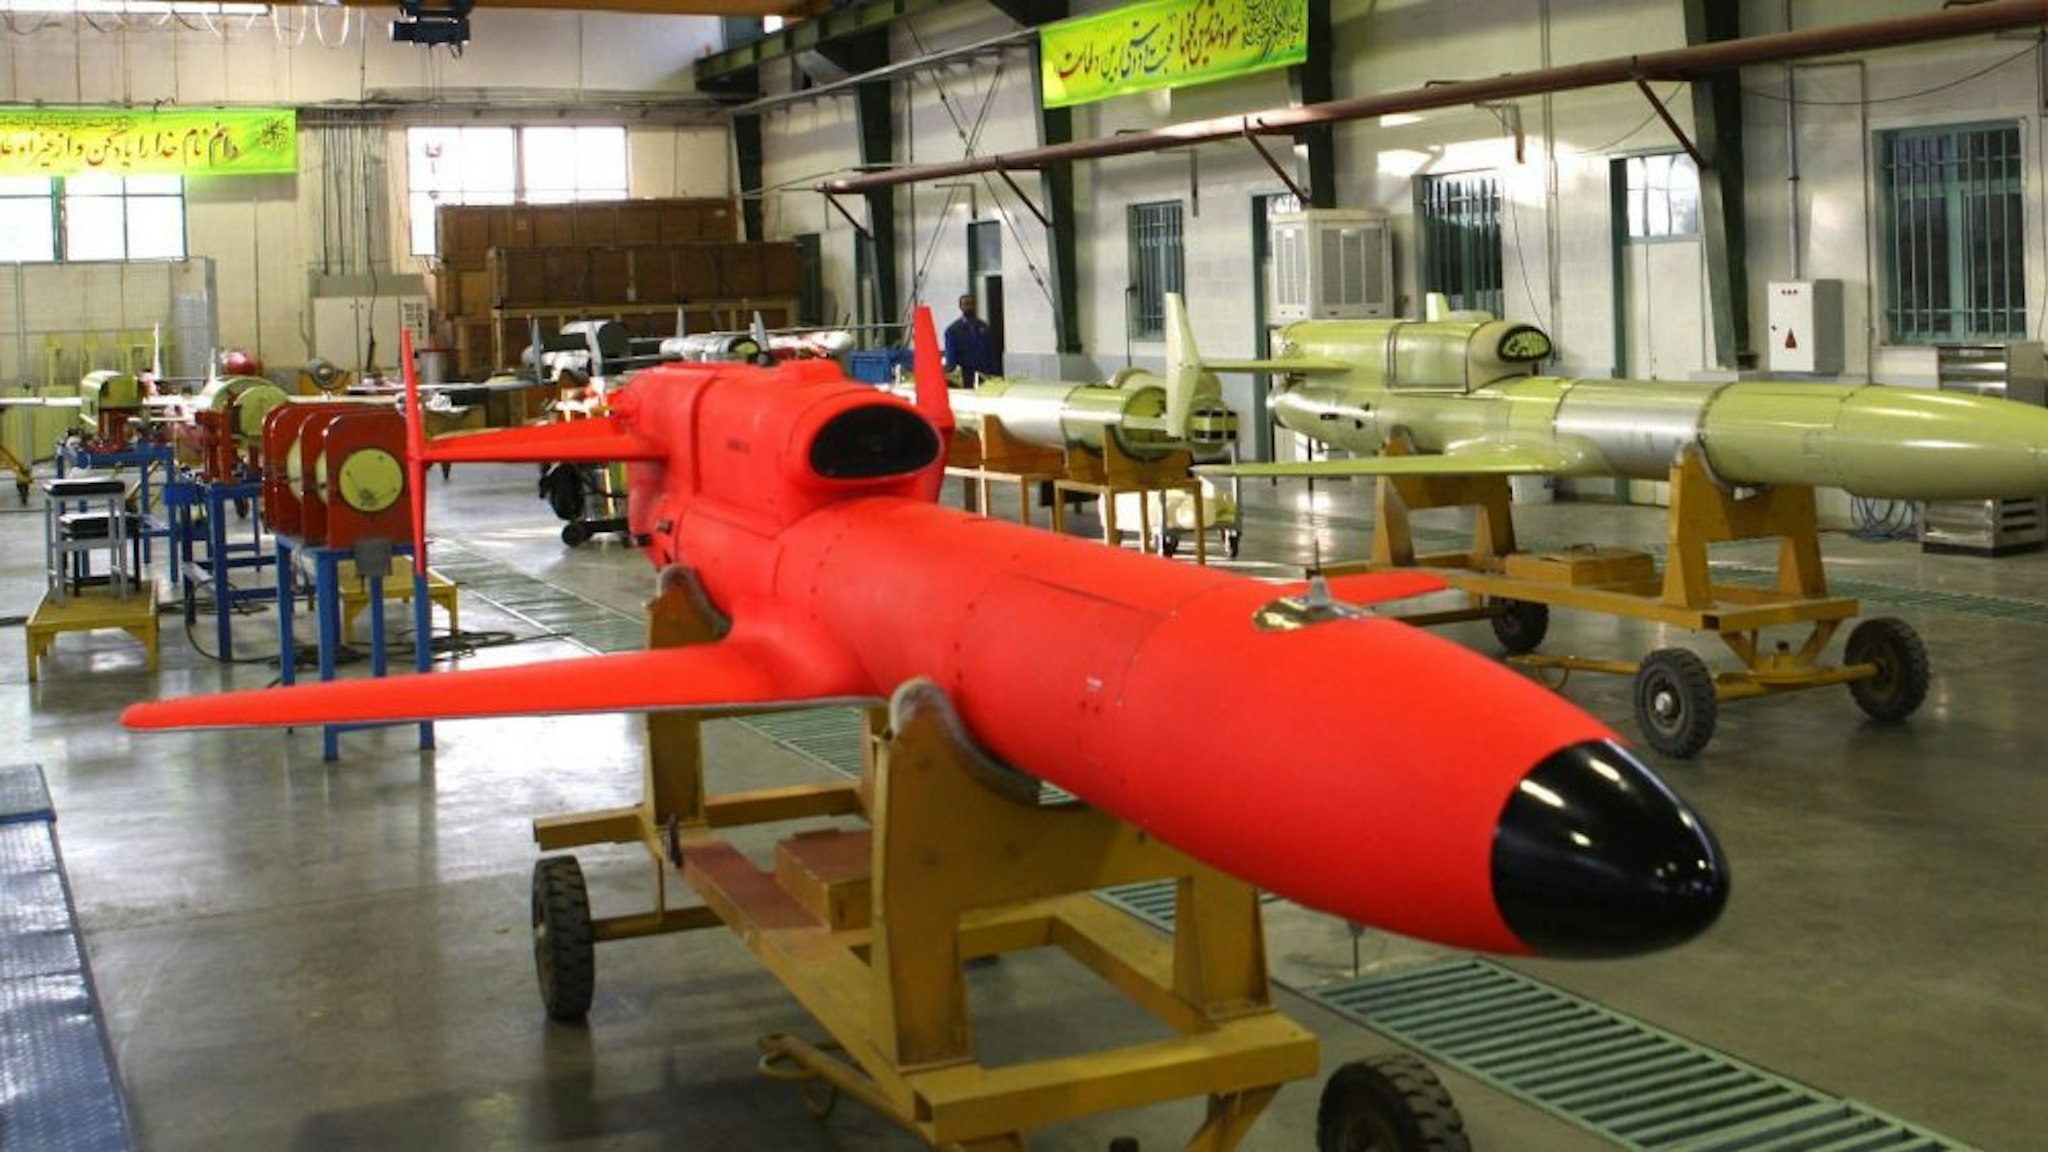 View on the Karrar drone aircraft long-range, unmanned bomber aircraft.